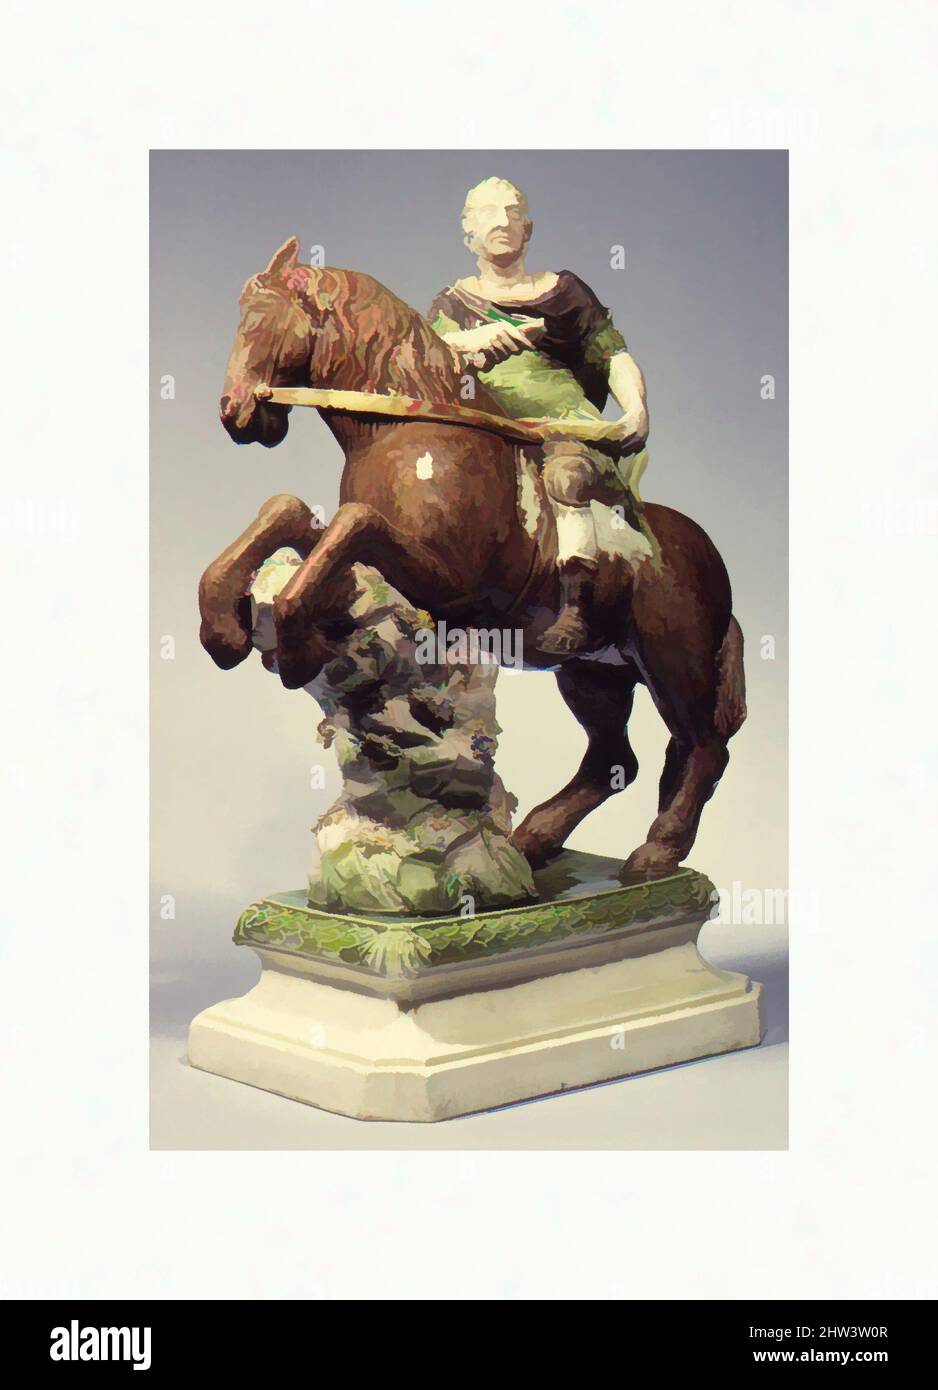 Art inspired by William III as a Roman emperor, Ralph Wood the Younger (British, Burslem 1748–1795 Burslem), ca. 1770–80, British, Burslem, Staffordshire, Lead-glazed earthenware, Height: 14 in. (35.6 cm), Ceramics-Pottery, Ralph Wood the Younger (British, Burslem 1748–1795 Burslem), Classic works modernized by Artotop with a splash of modernity. Shapes, color and value, eye-catching visual impact on art. Emotions through freedom of artworks in a contemporary way. A timeless message pursuing a wildly creative new direction. Artists turning to the digital medium and creating the Artotop NFT Stock Photo